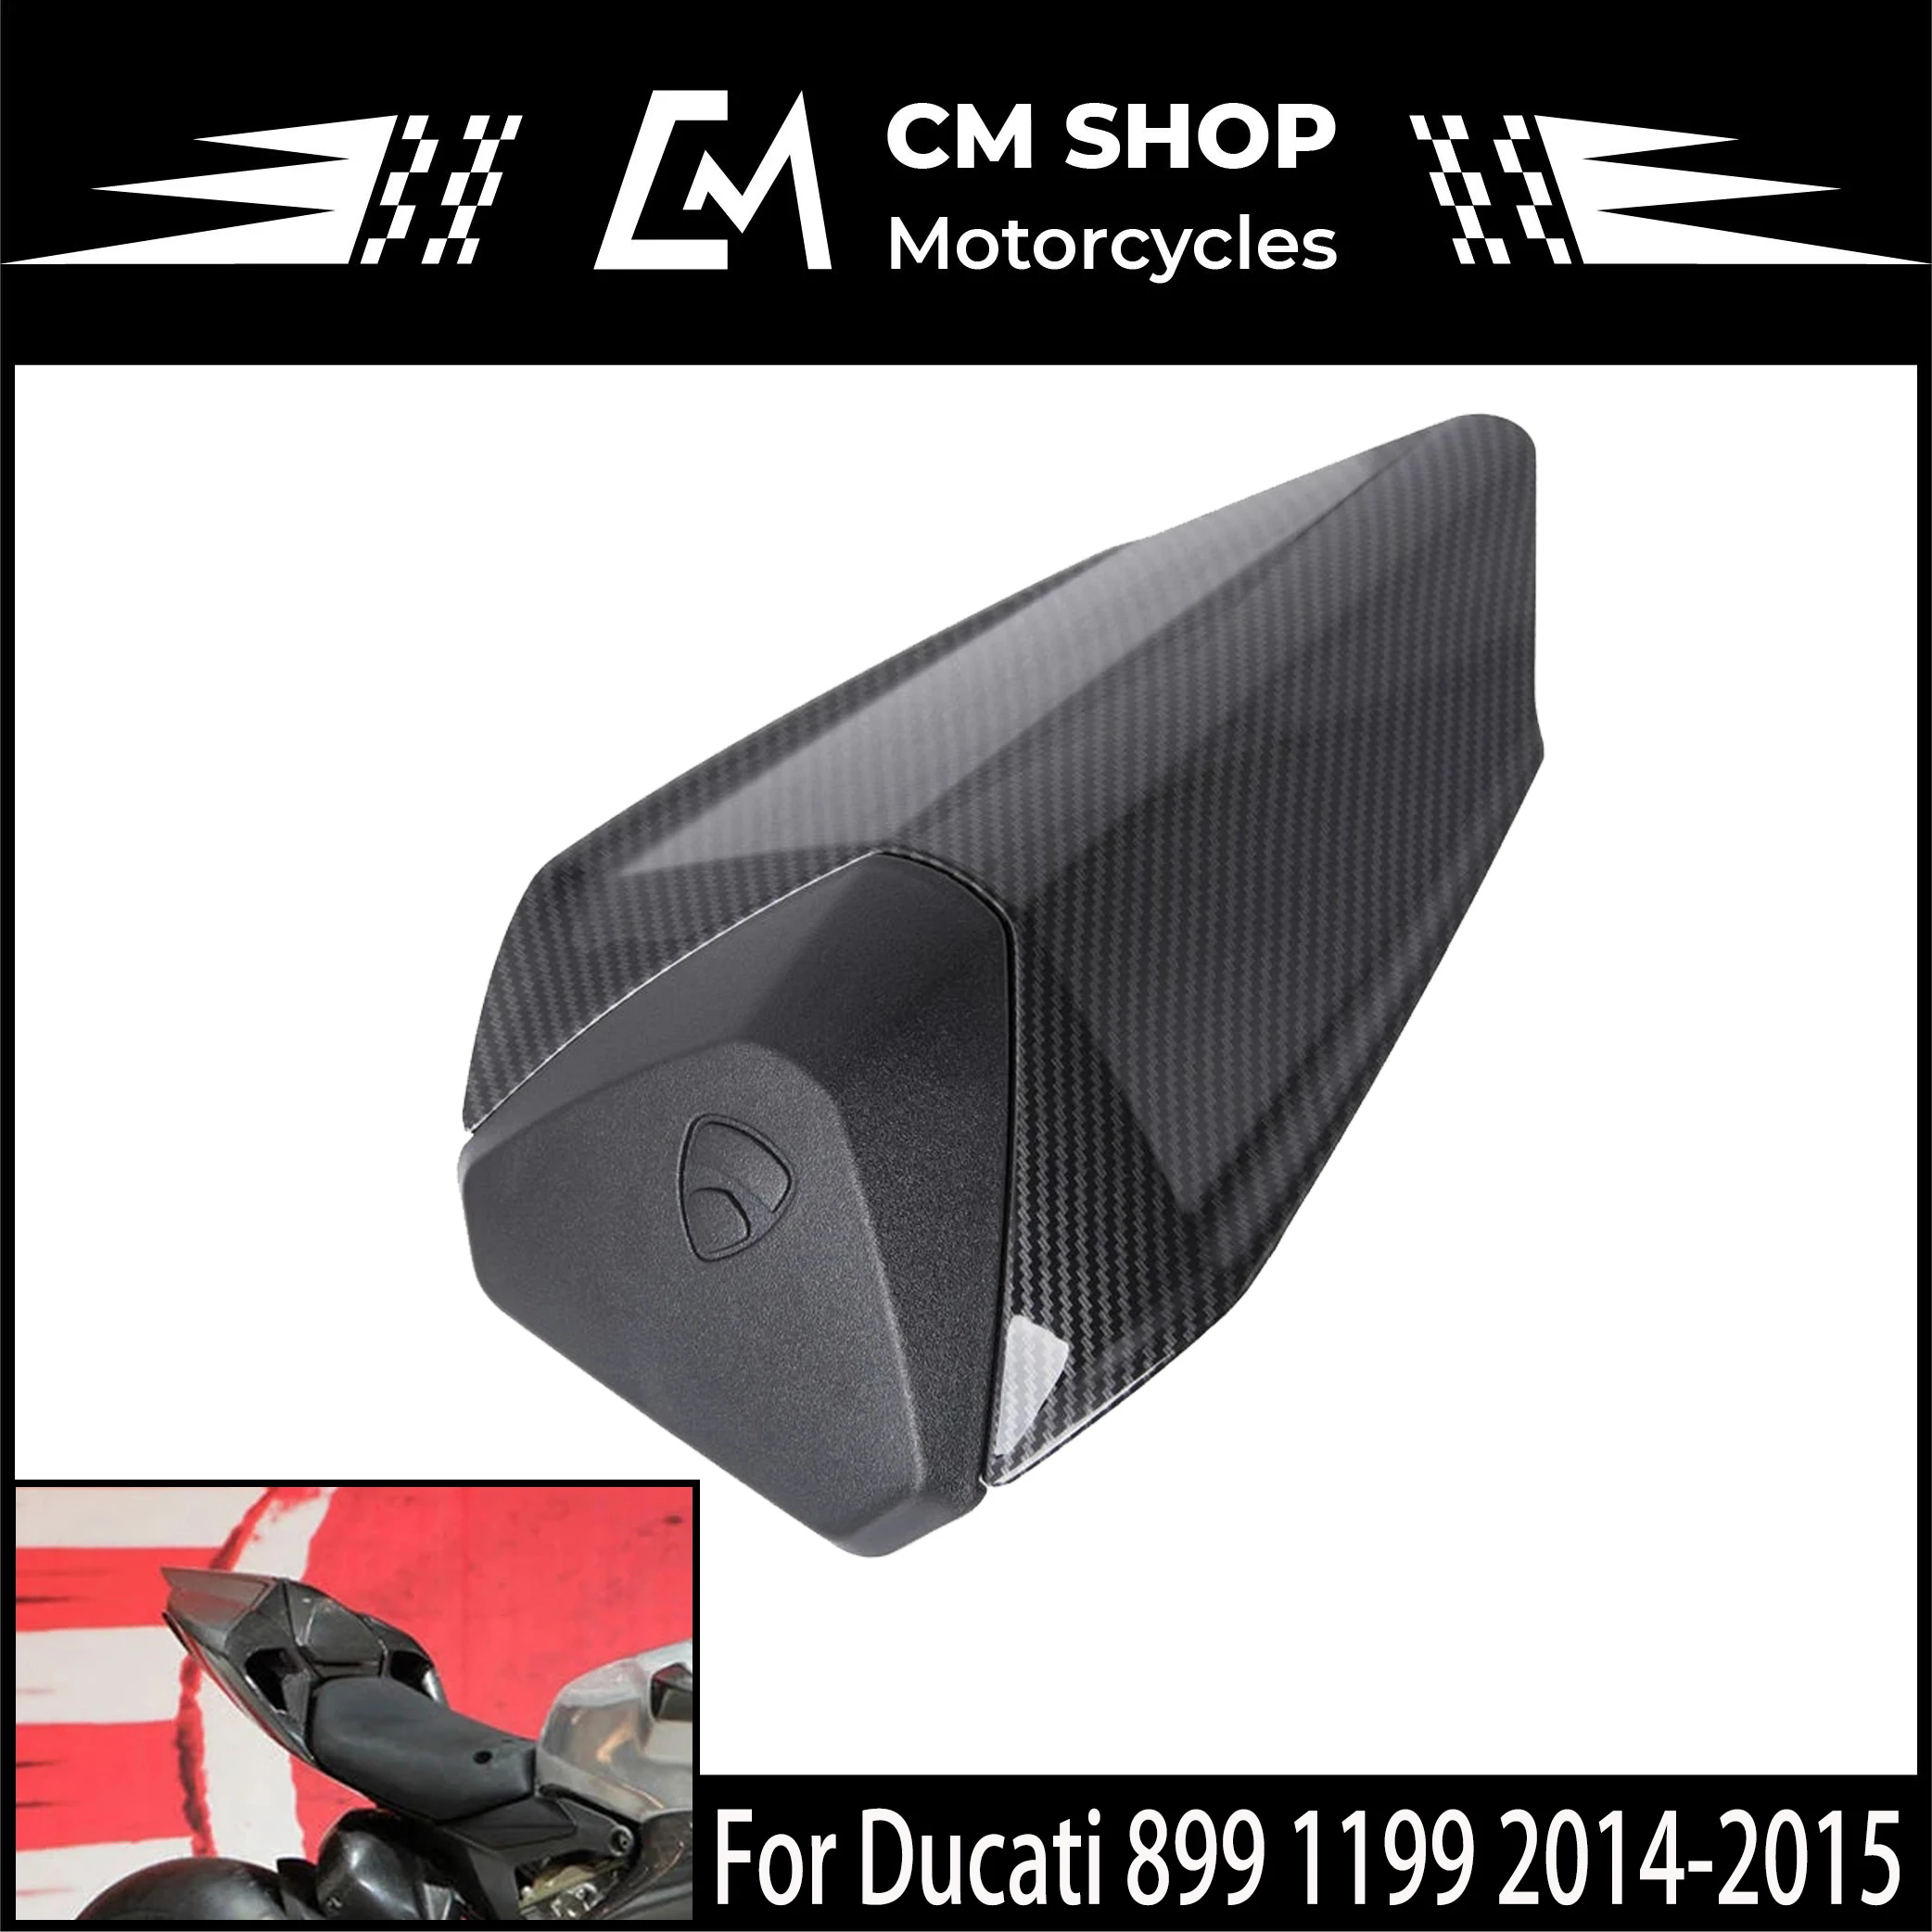 Motorcycle Rear Passenger Hard Seat Fairing Parts For Ducati 899 Panigale 2014 2015 1199 Panigale / S 2012-2014